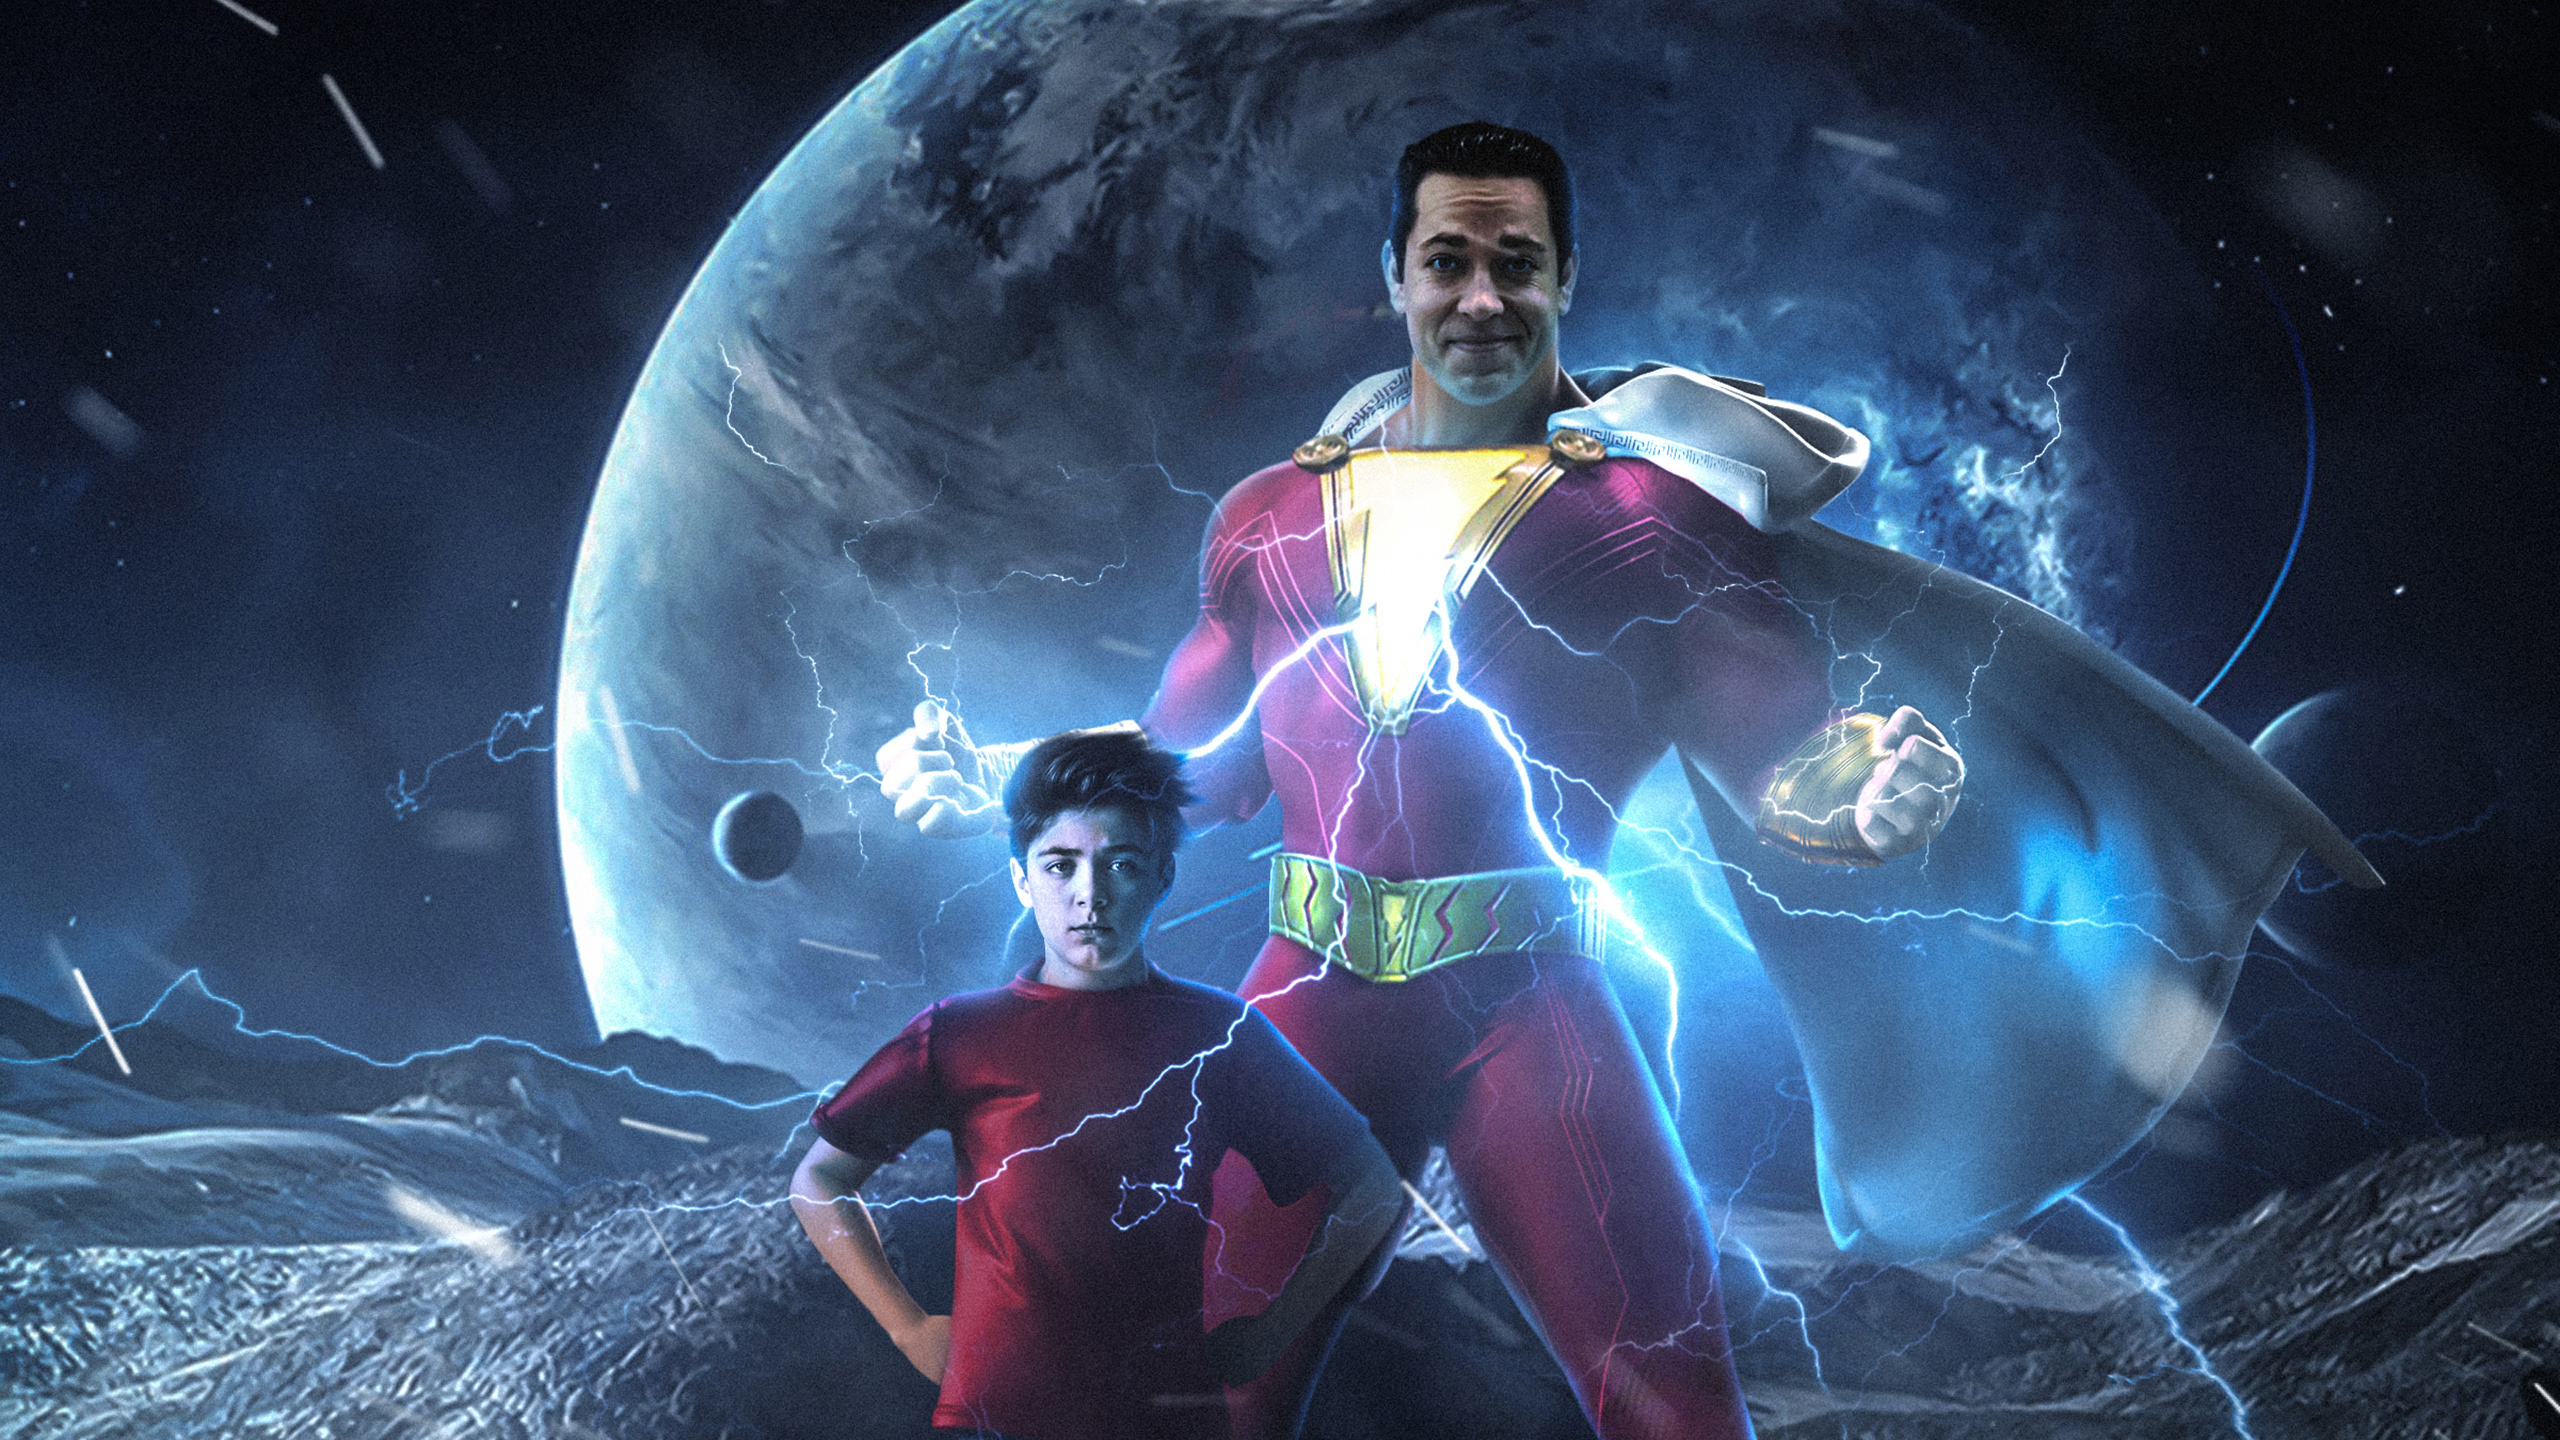 Asher angel with zachary levi background